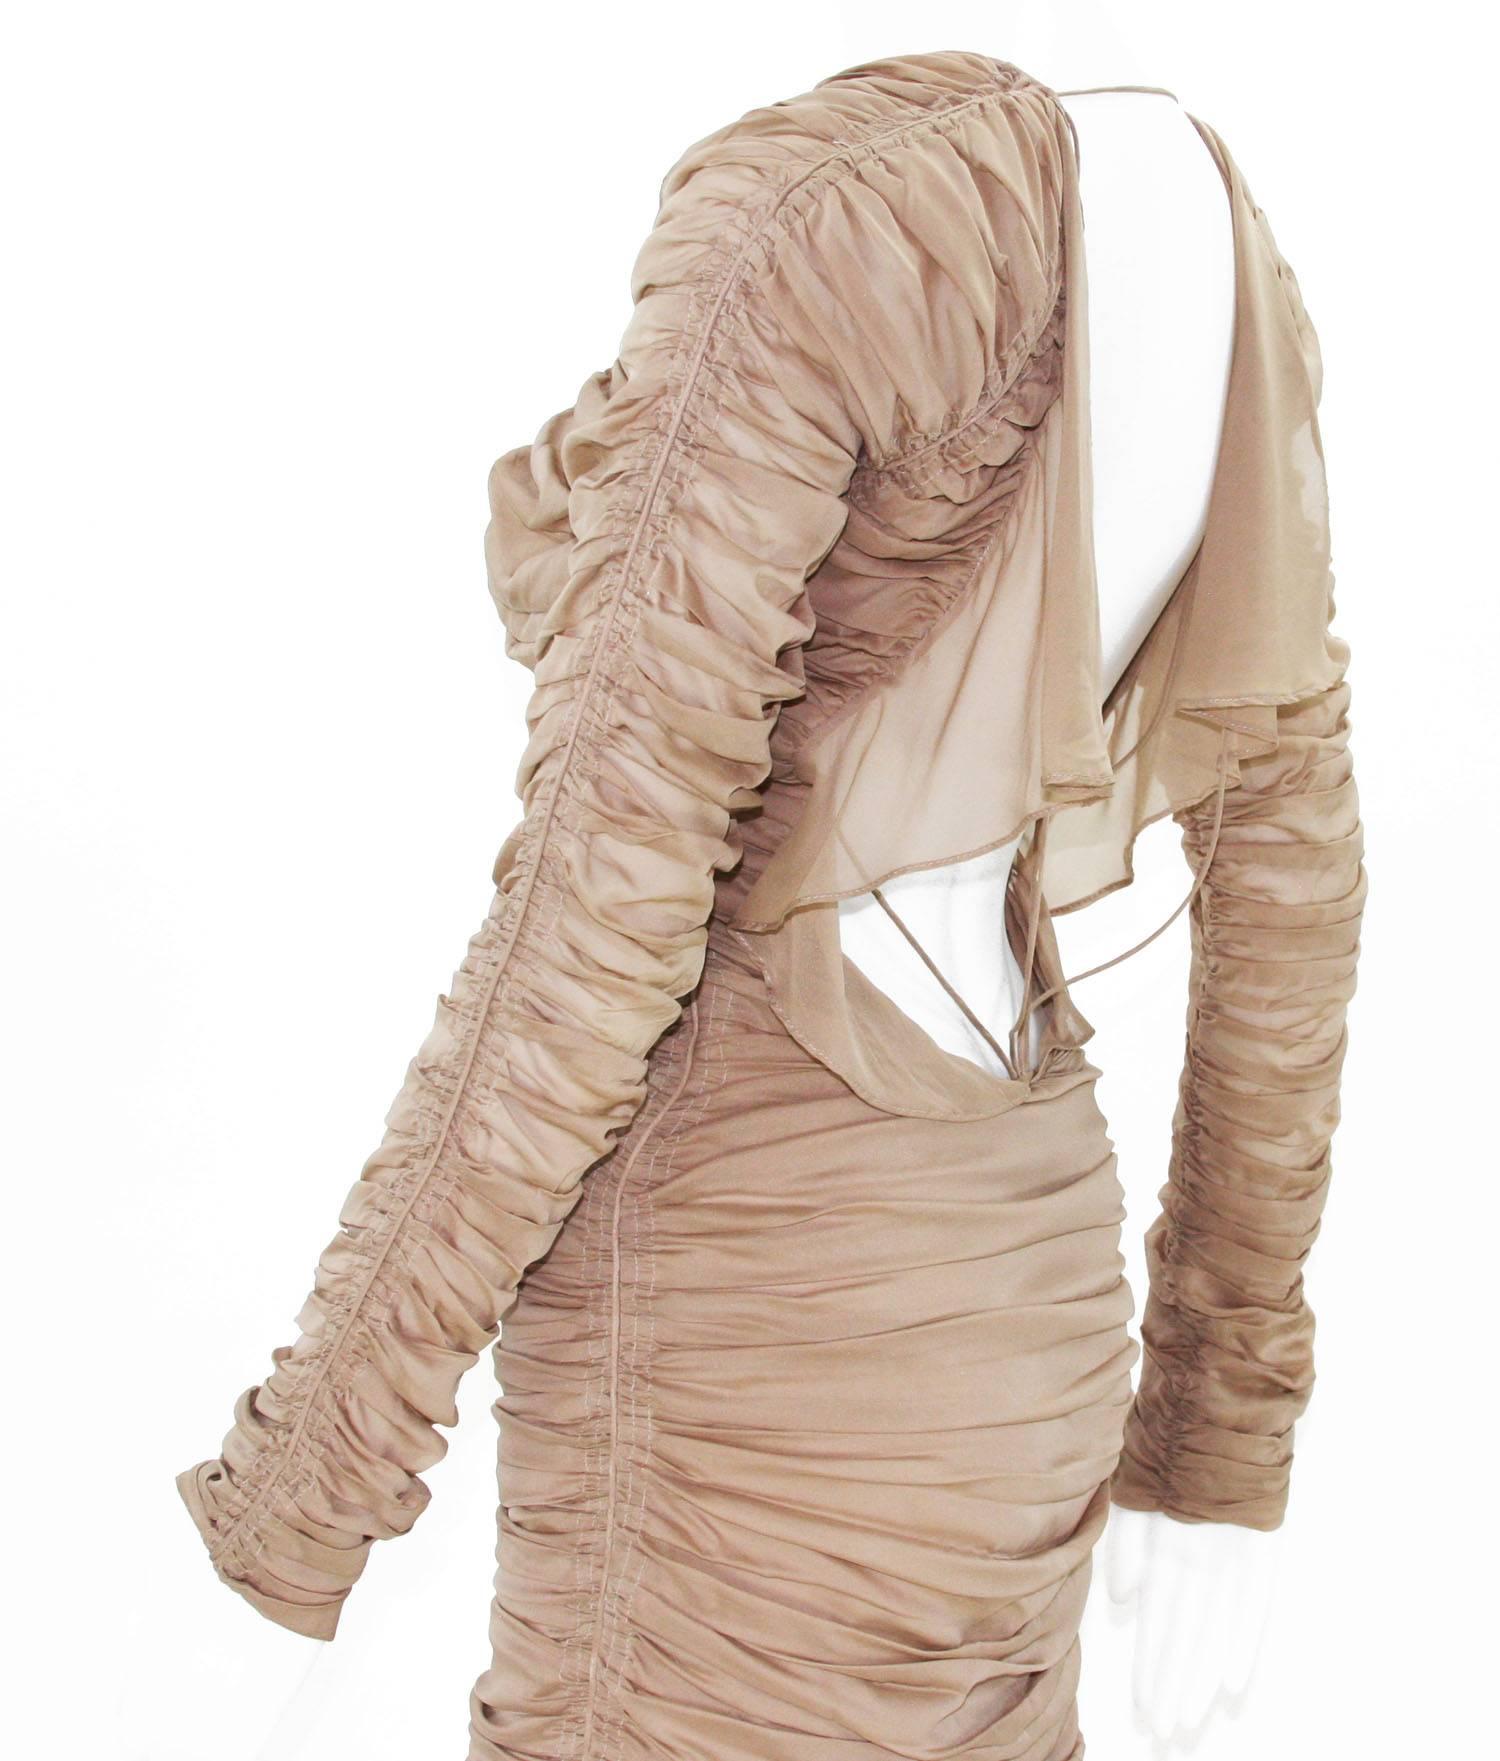 Tom Ford for Gucci S/S 2003 Collection Nude Silk Stretch Open Back Dress Gown S 2